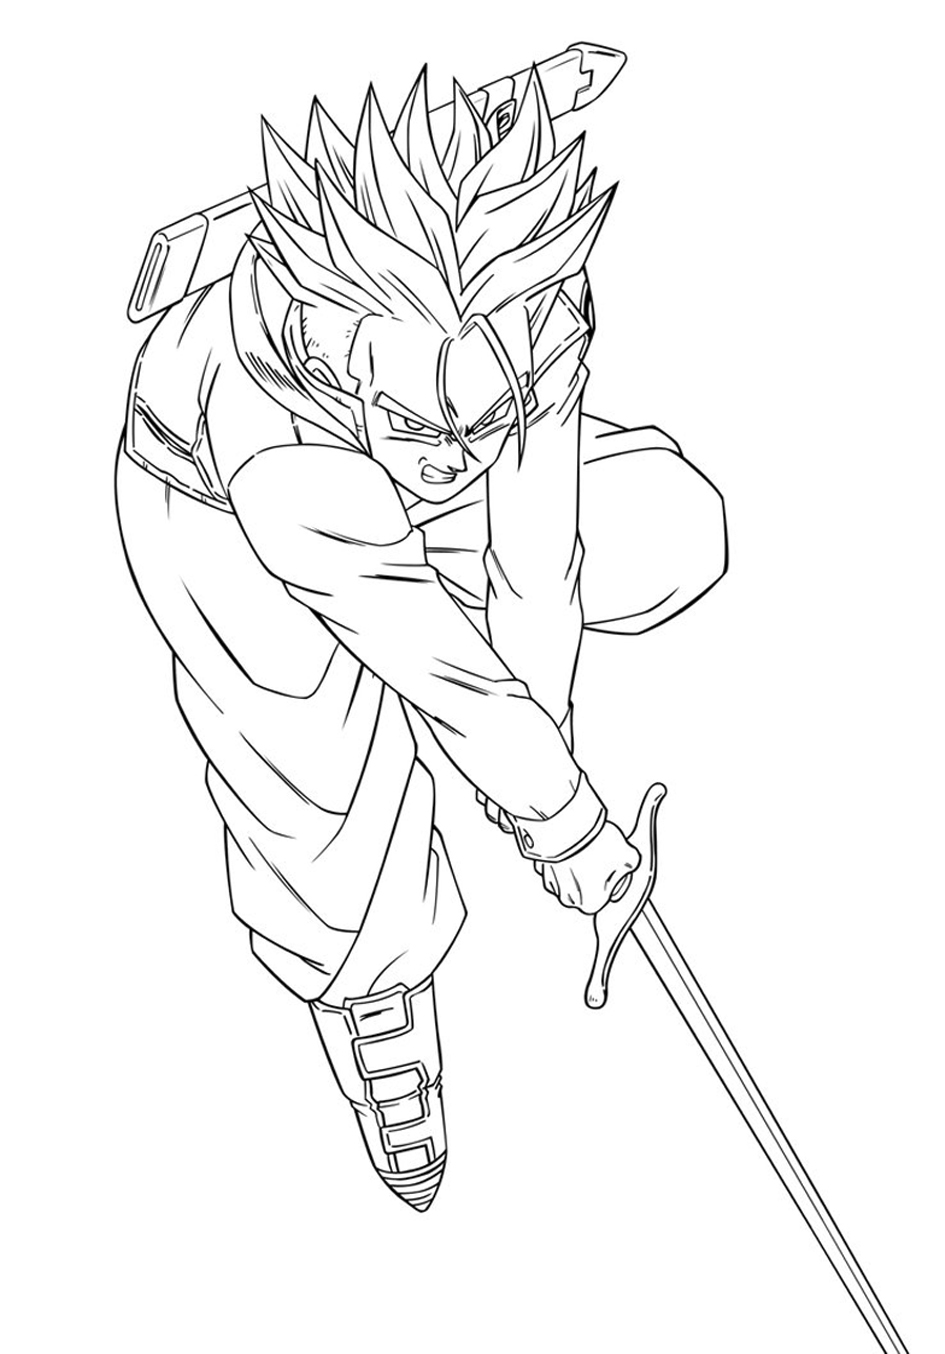 Trunks - Dragon Ball Kids Coloring Pages